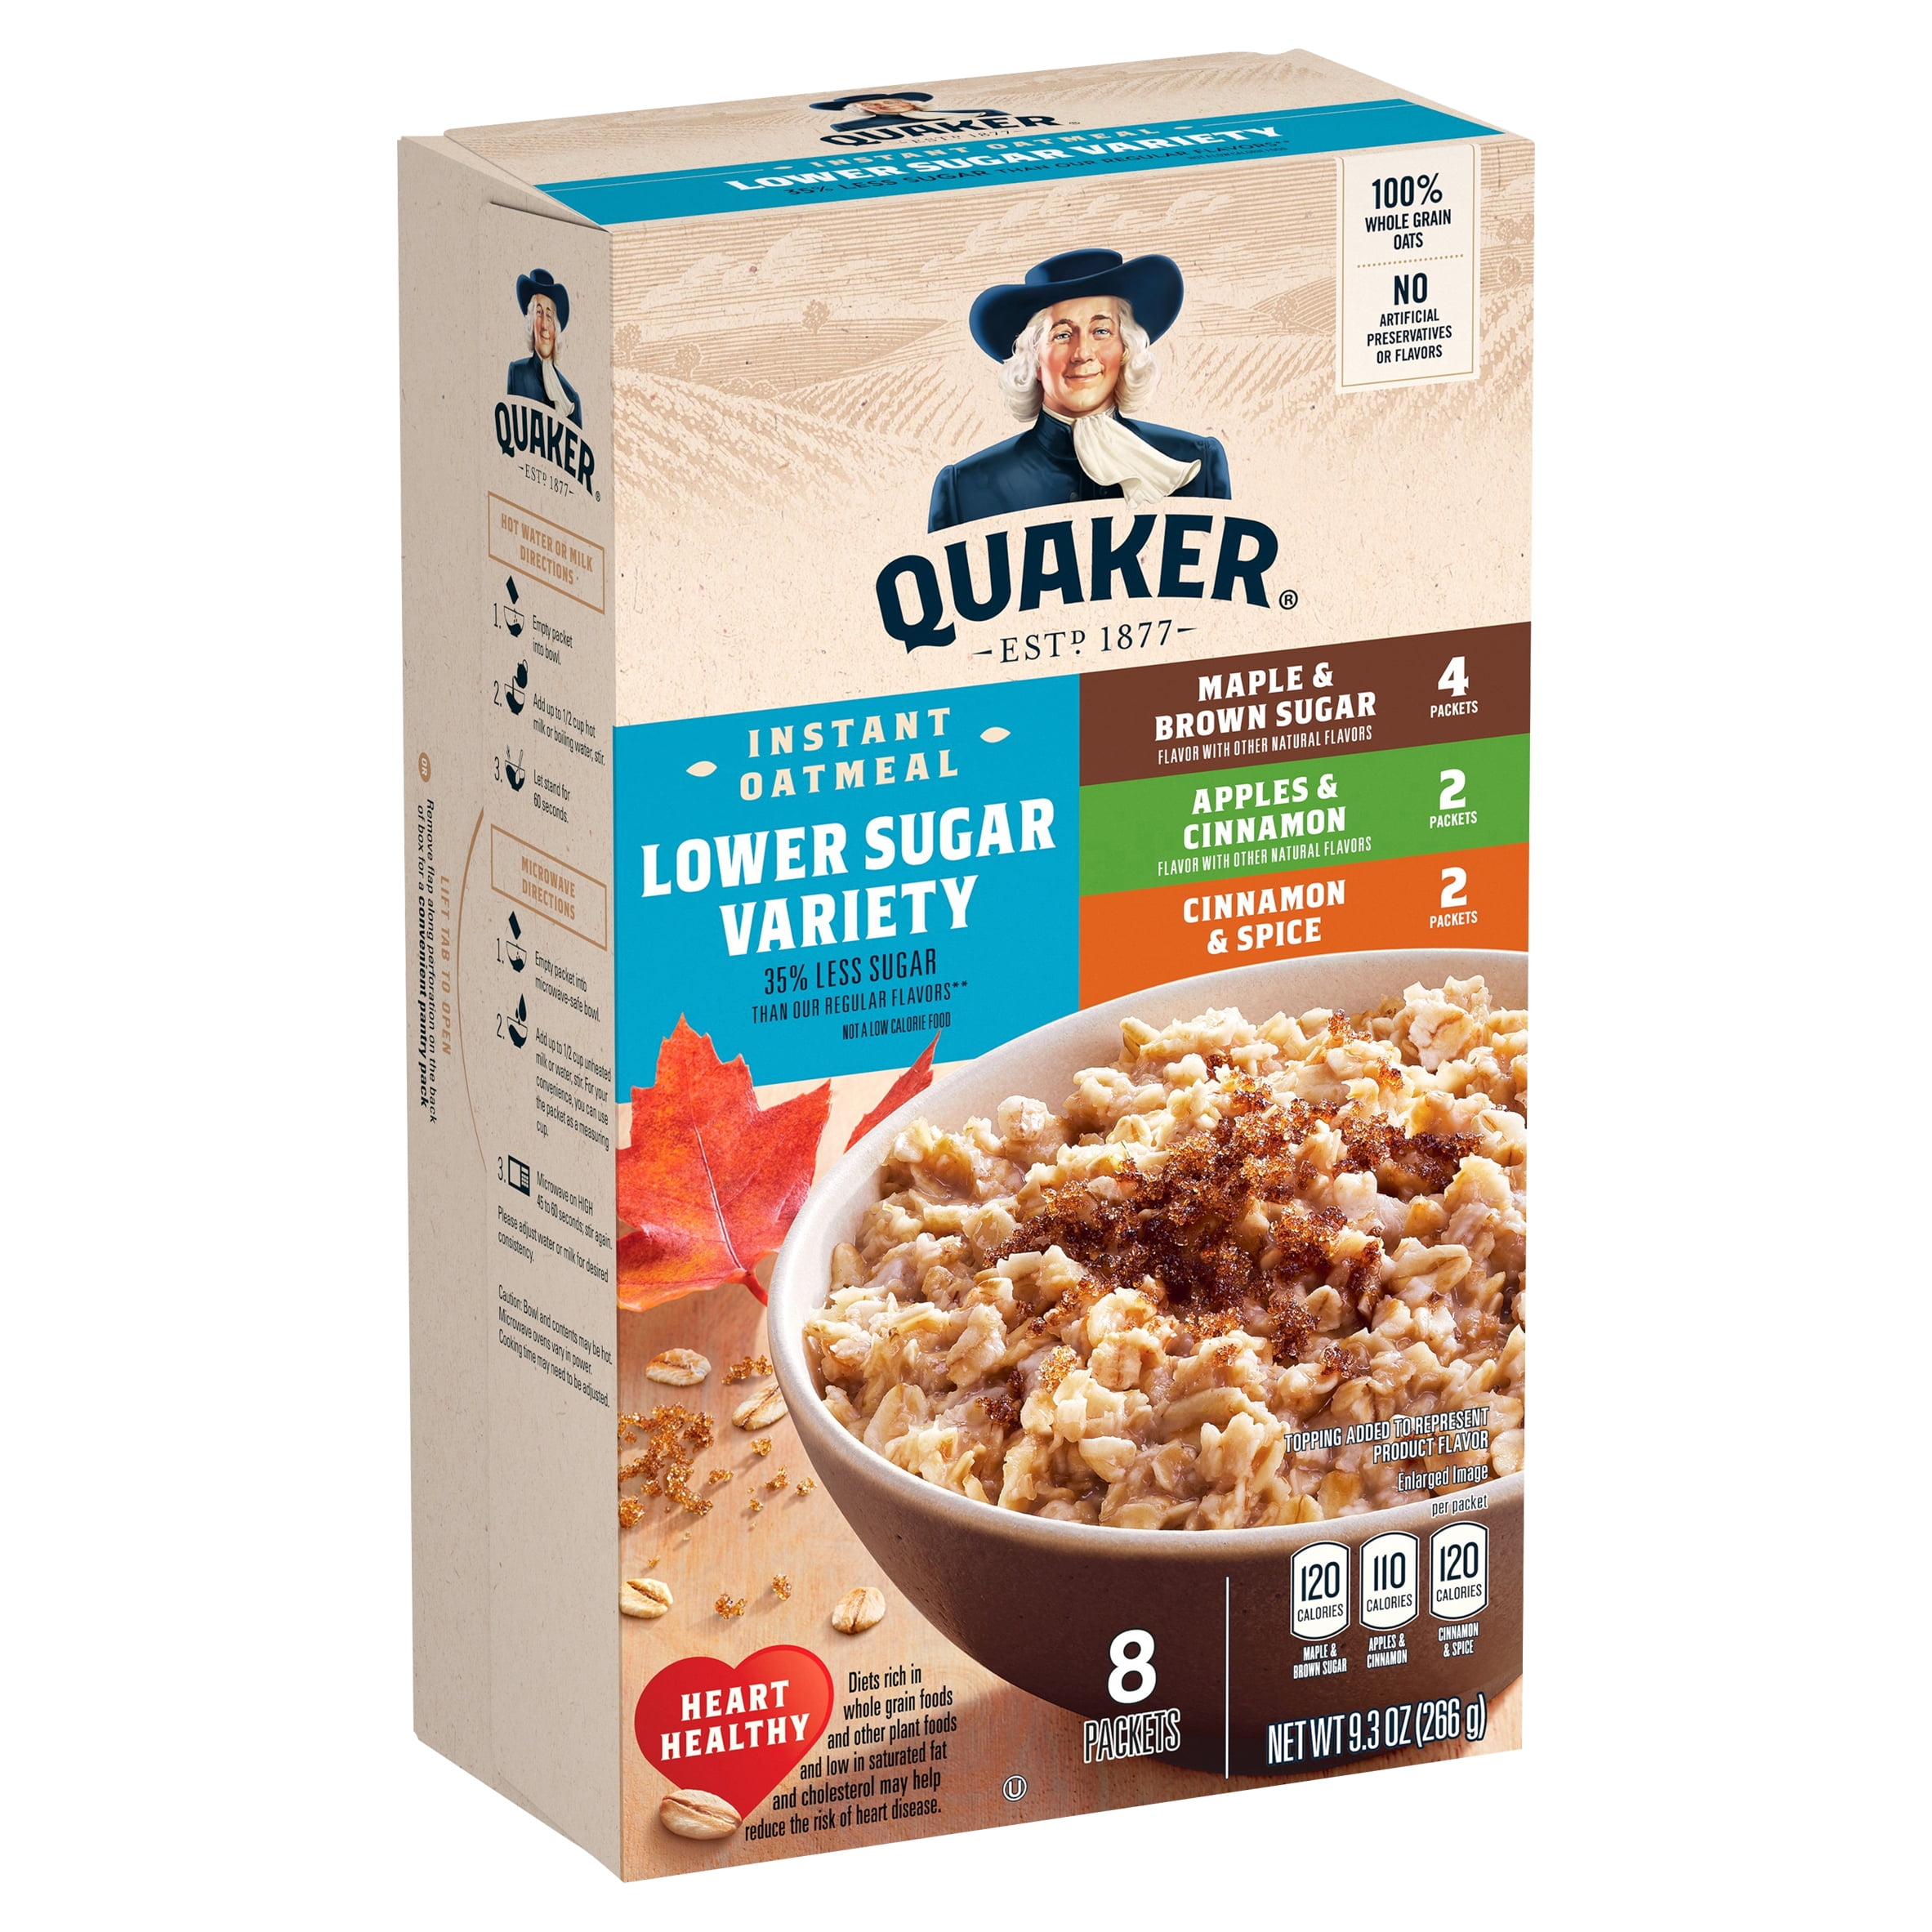 Quaker Instant Oatmeal Lower Sugar Variety 9.3 oz, 8 Count